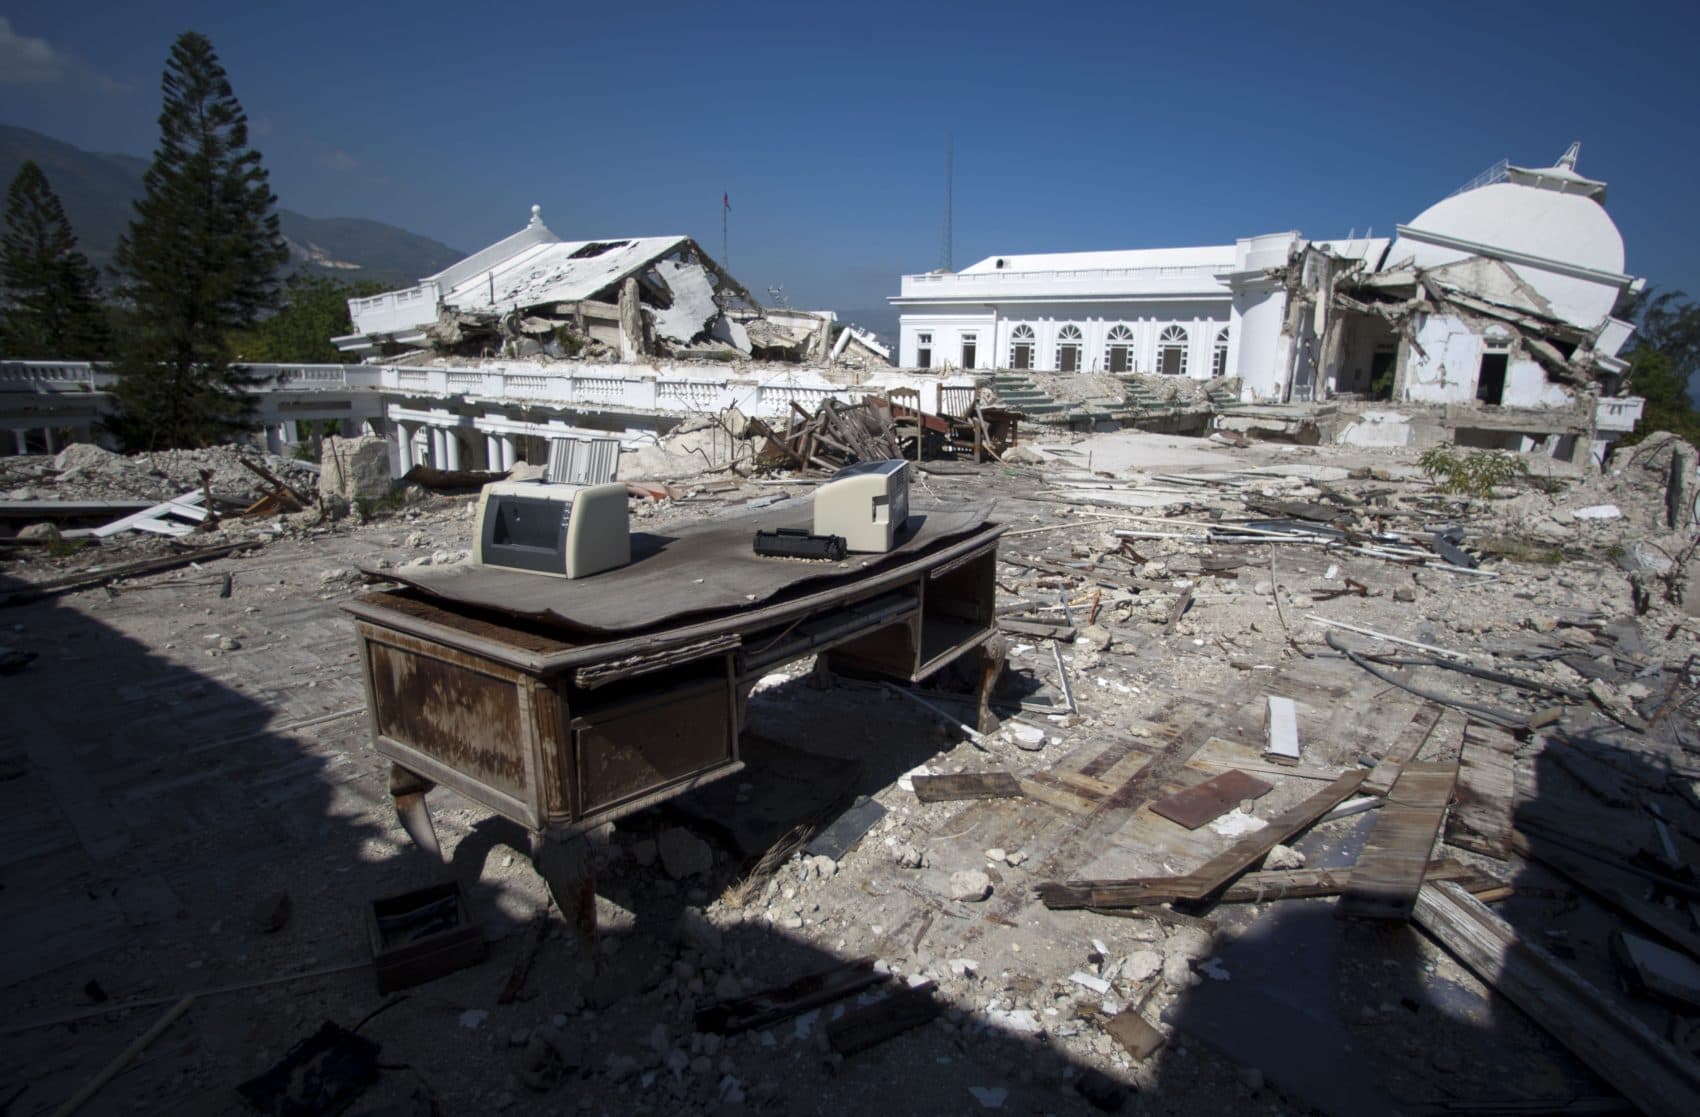 In this 2012 photo, printers sit on a desk on the roof the earthquake damaged National Palace in Port-au-Prince, Haiti. (Dieu Nalio Chery/AP)